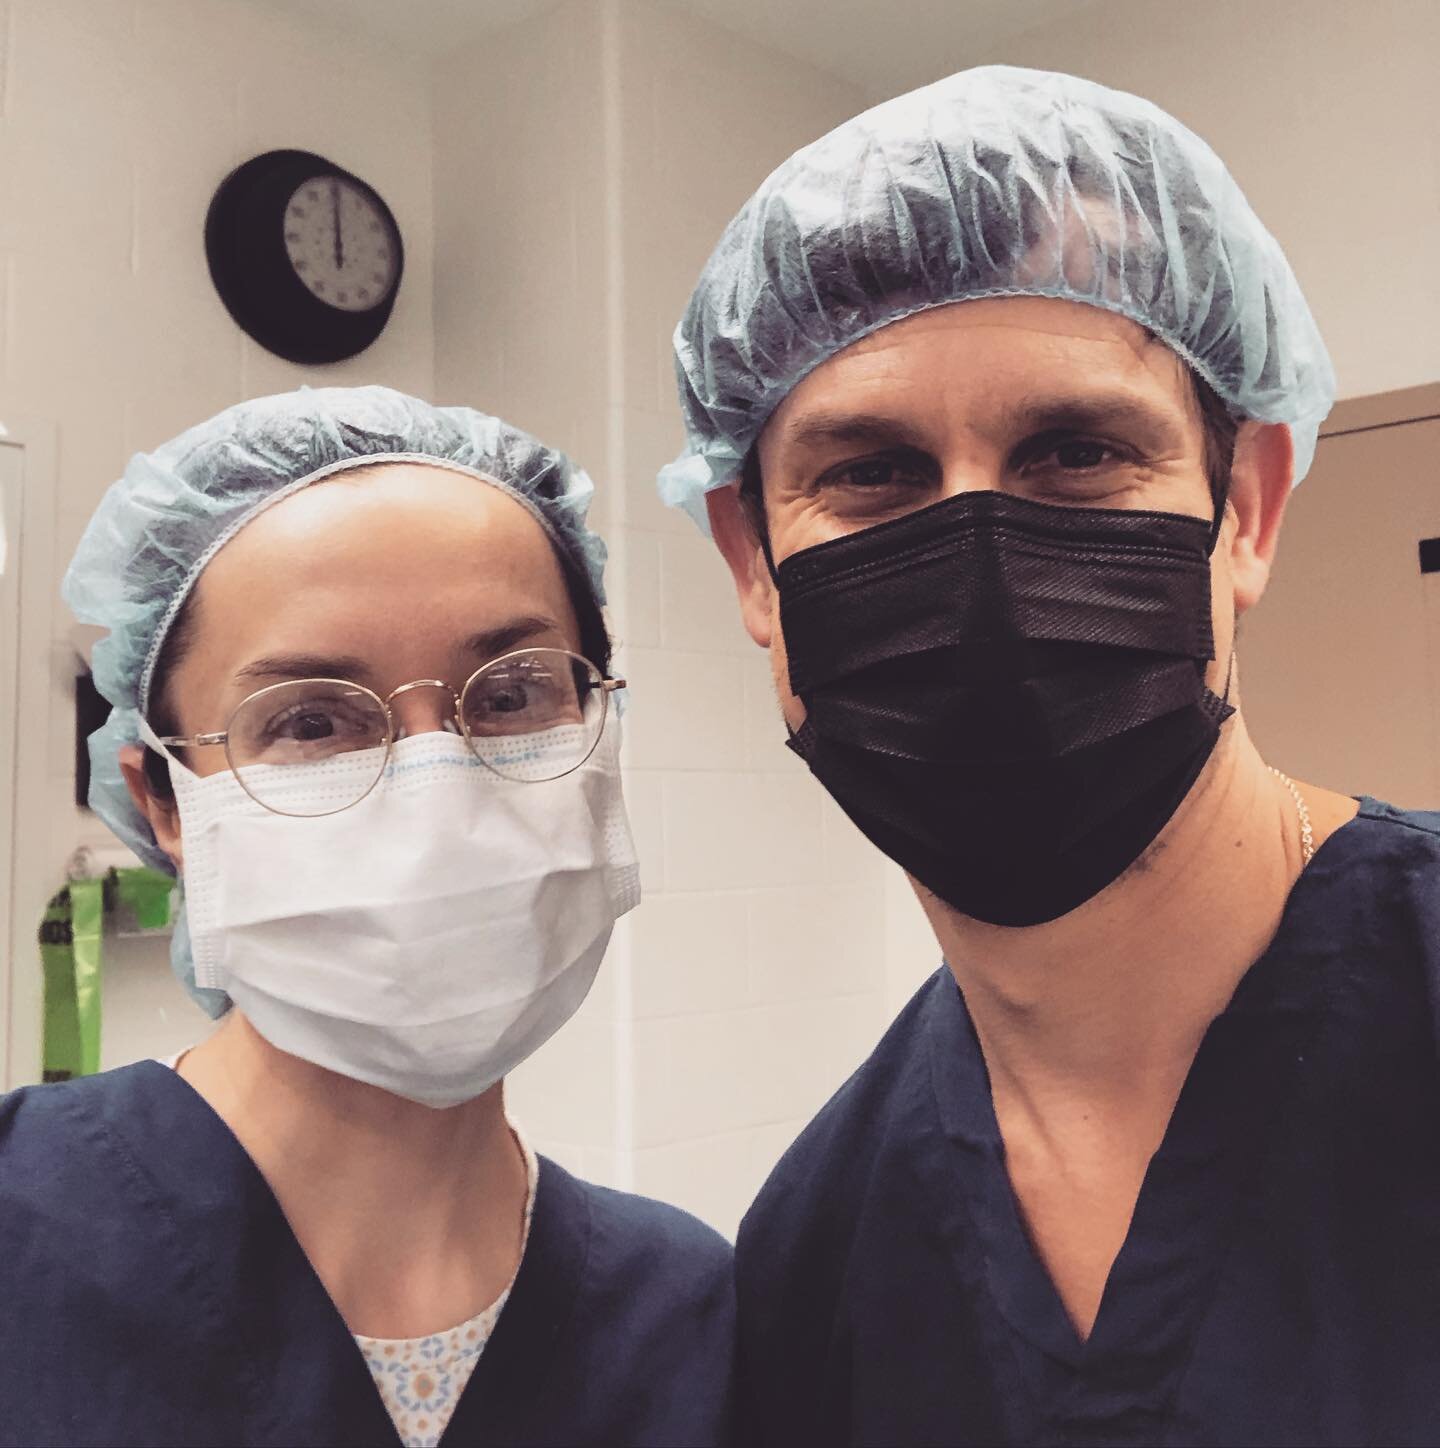 Once in private practice, one of the things that I will miss most is the teamwork with ENT resident surgeons like @mluitje.  If you open your mind and ears, there is reciprocal and parallel learning especially with brilliant, skillful, and dedicated 